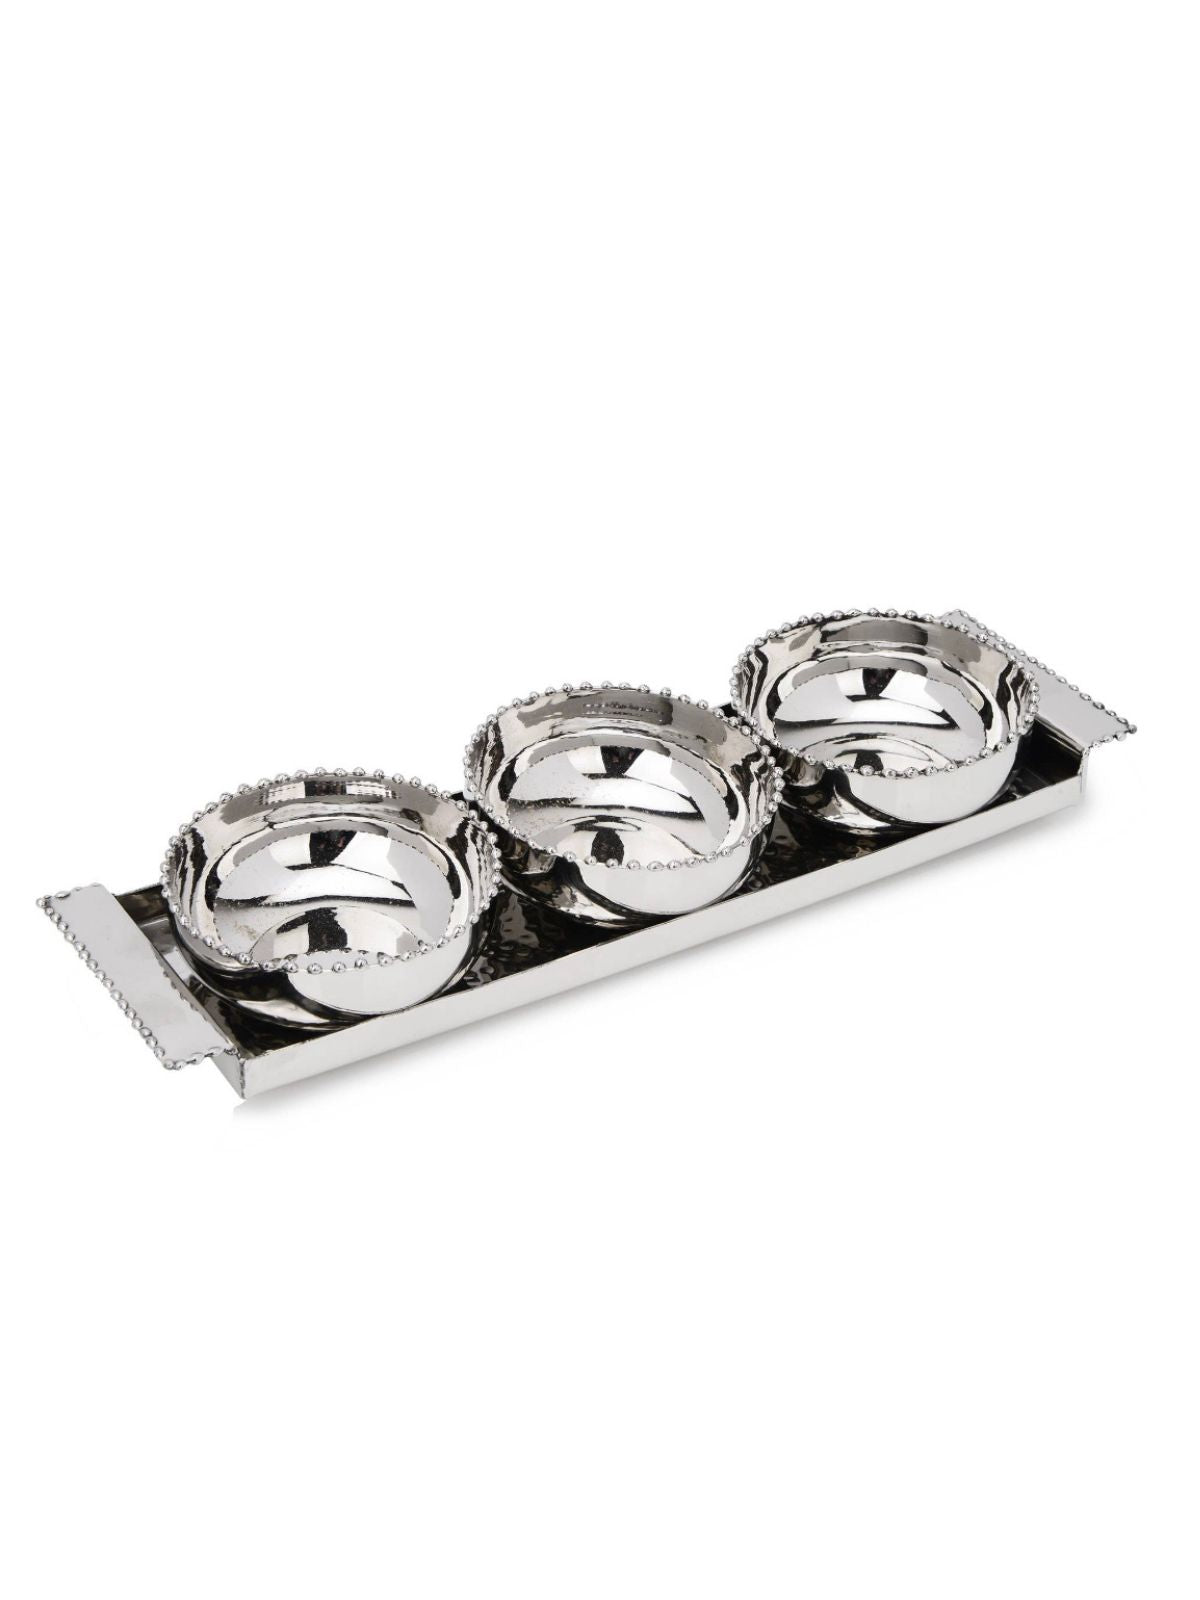 This relish dish features hammered stainless steel adorned with silver beading. This dish was handcrafted by professional artisans and is perfect for all occasions.